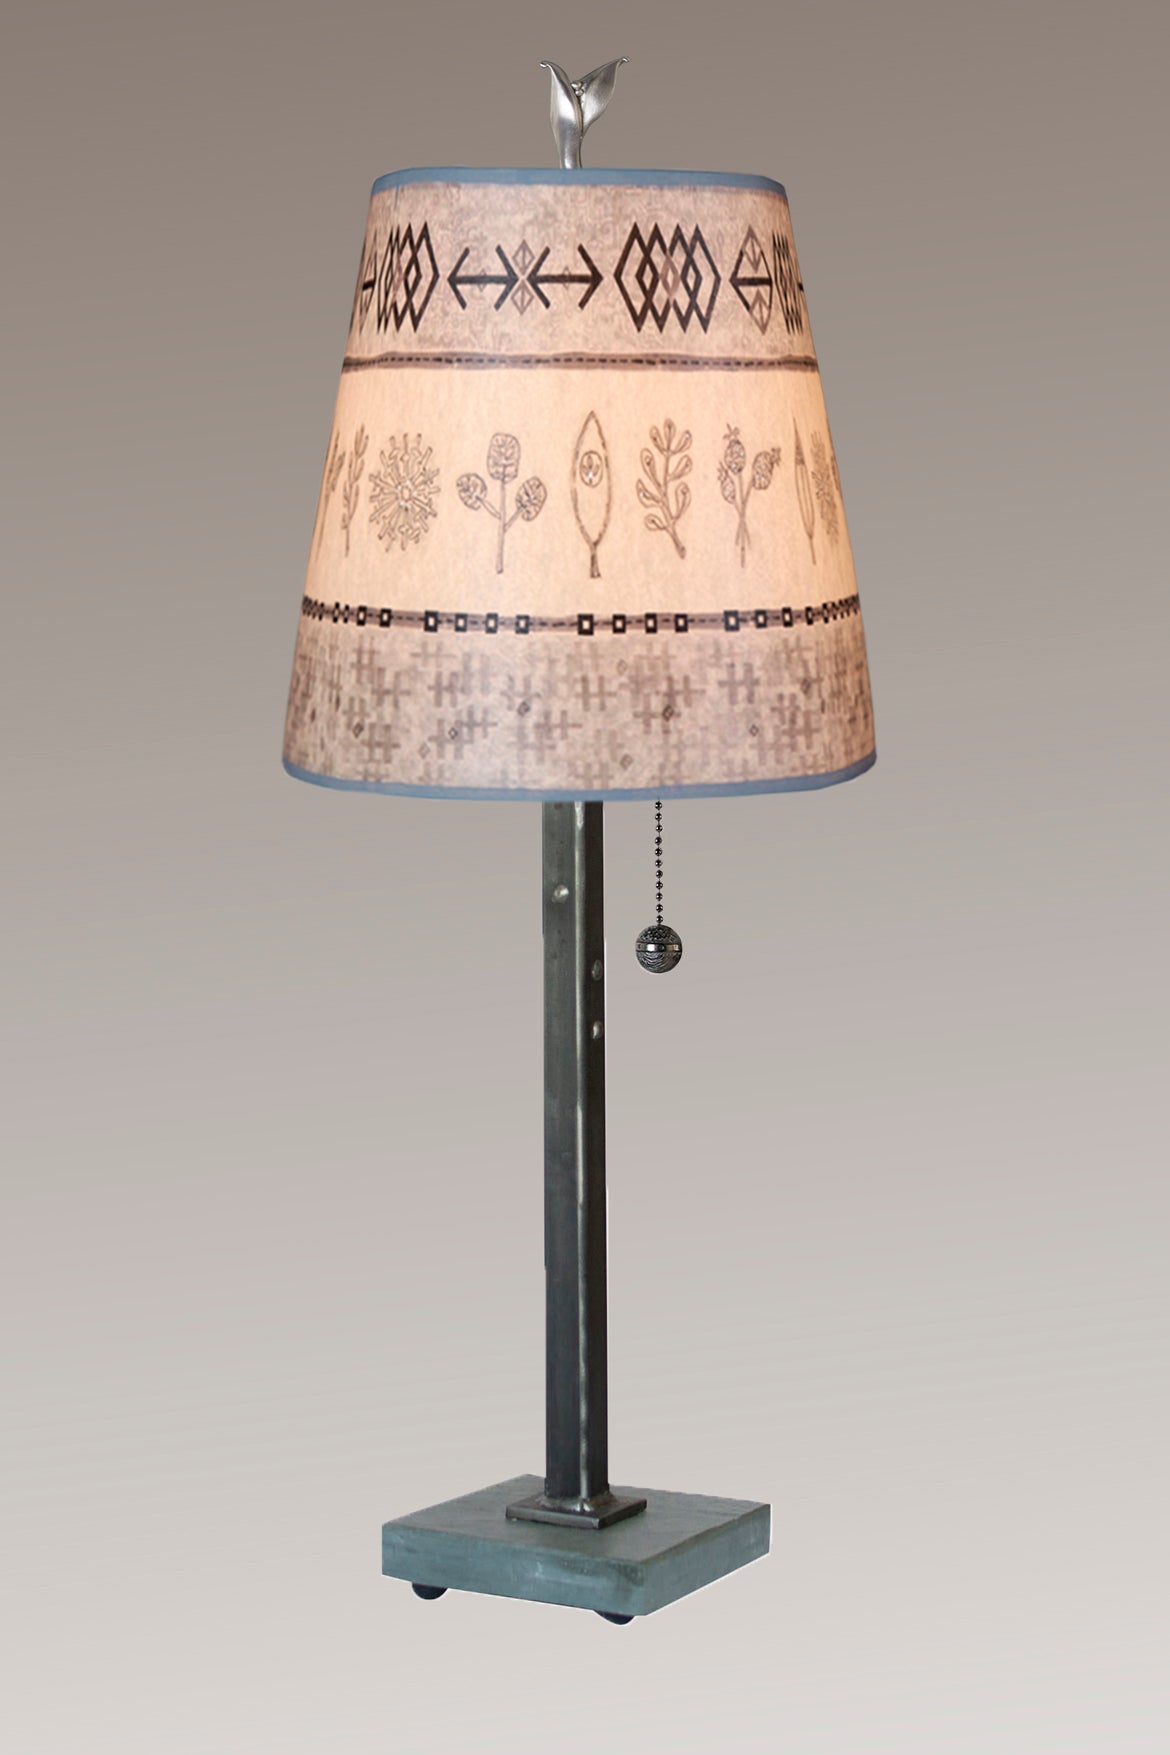 Janna Ugone & Co Table Lamps Steel Table Lamp with Small Drum Shade in Woven & Sprig in Mist